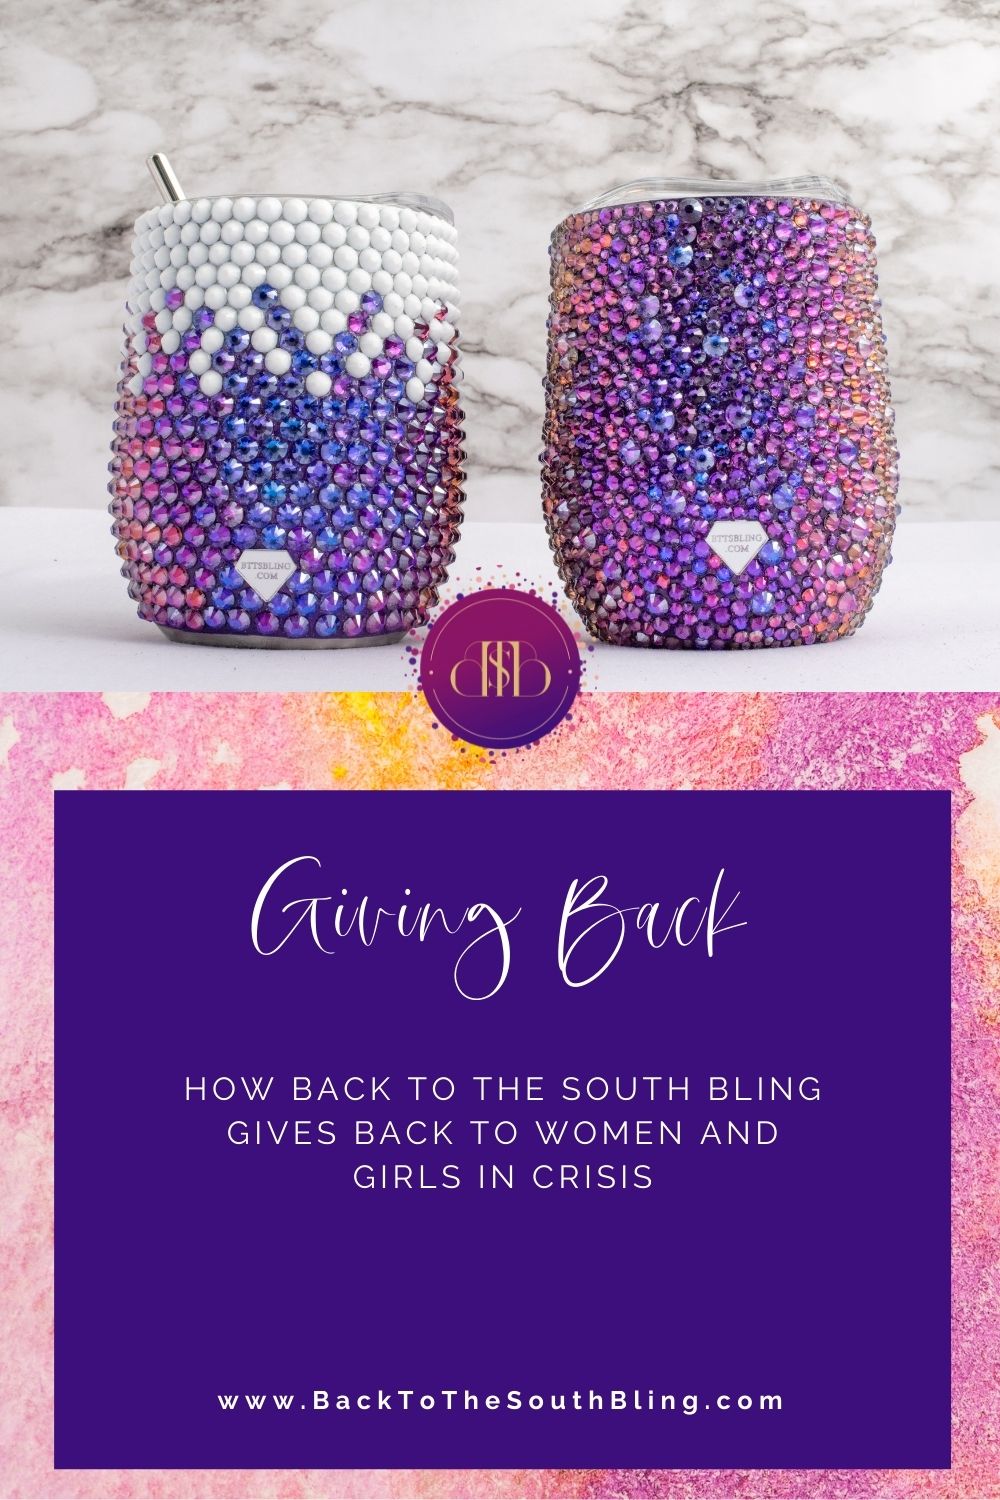 How Back to the South Bling Gives Back to the Community